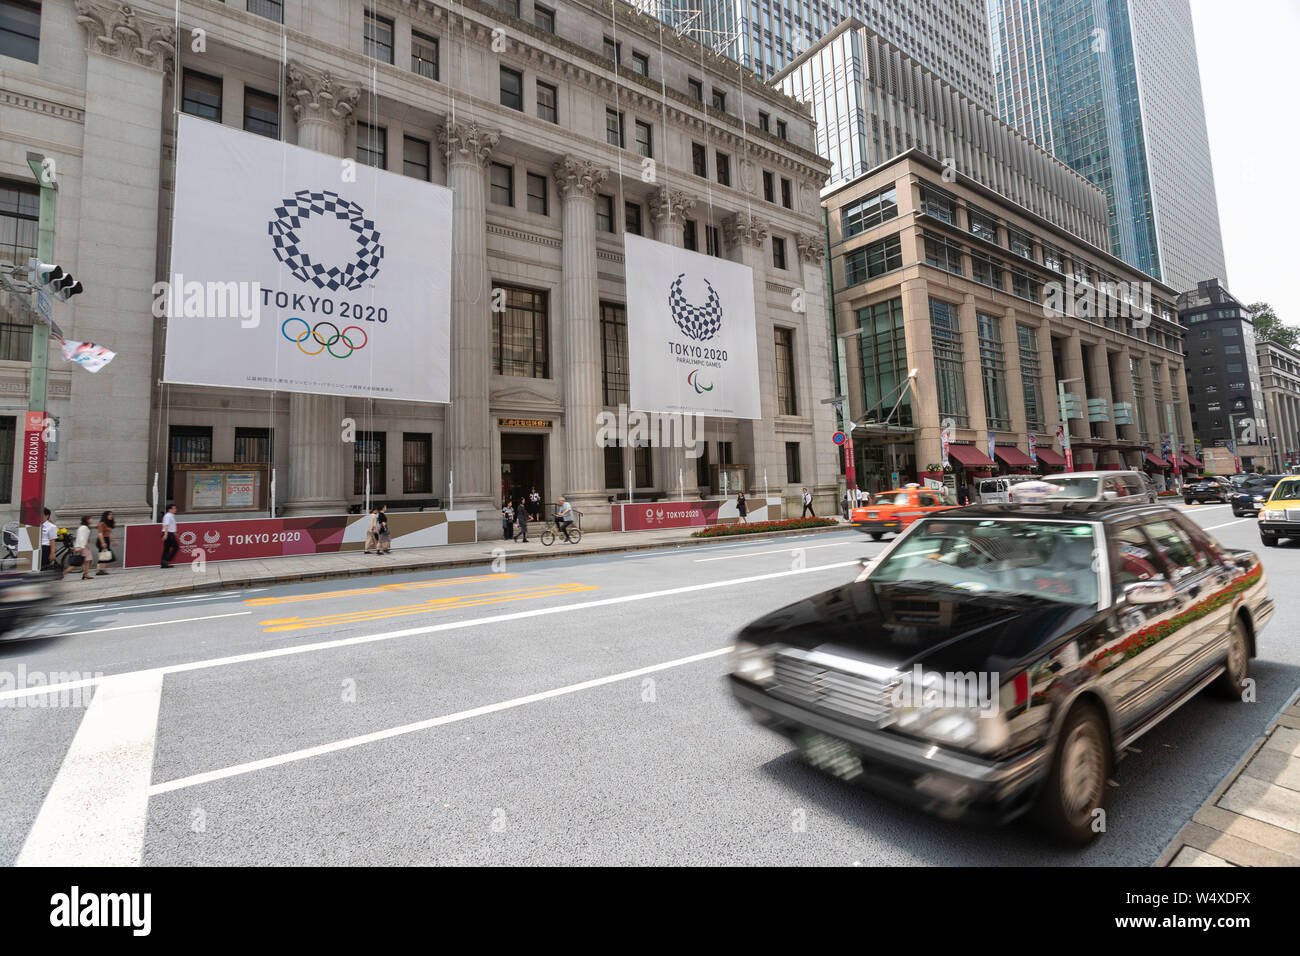 Tokyo, Japan. 25th July, 2019. Huge banners of Tokyo 2020 Olympic Games are on display outside Sumitomo Mitsui Trust Bank to promote the 2020 Tokyo Olympic and Paralympic Games. Tokyo marks one year to go 2020 Olympics decorating with Olympic emblems and photos of Japanese athletes some buildings of Nihonbashi district in Tokyo. The Games are set to open on July 24, 2020. Credit: Rodrigo Reyes Marin/AFLO/Alamy Live News Stock Photo